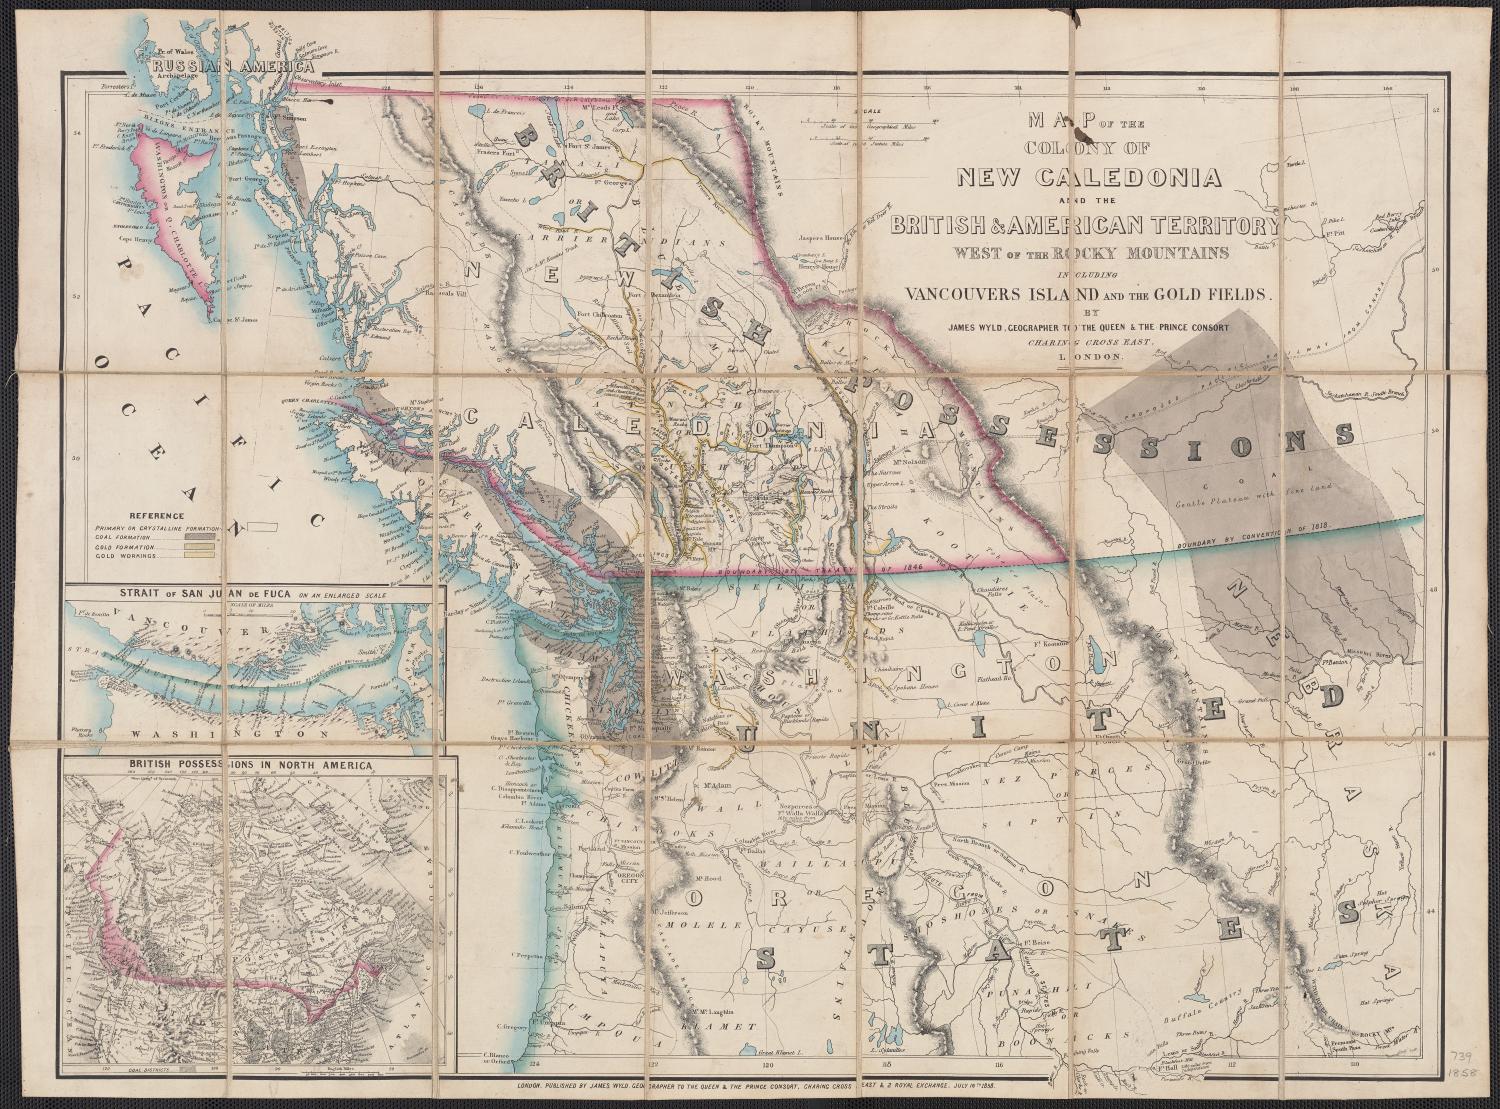 Map of New Caledonia (B.C.) in 1858.